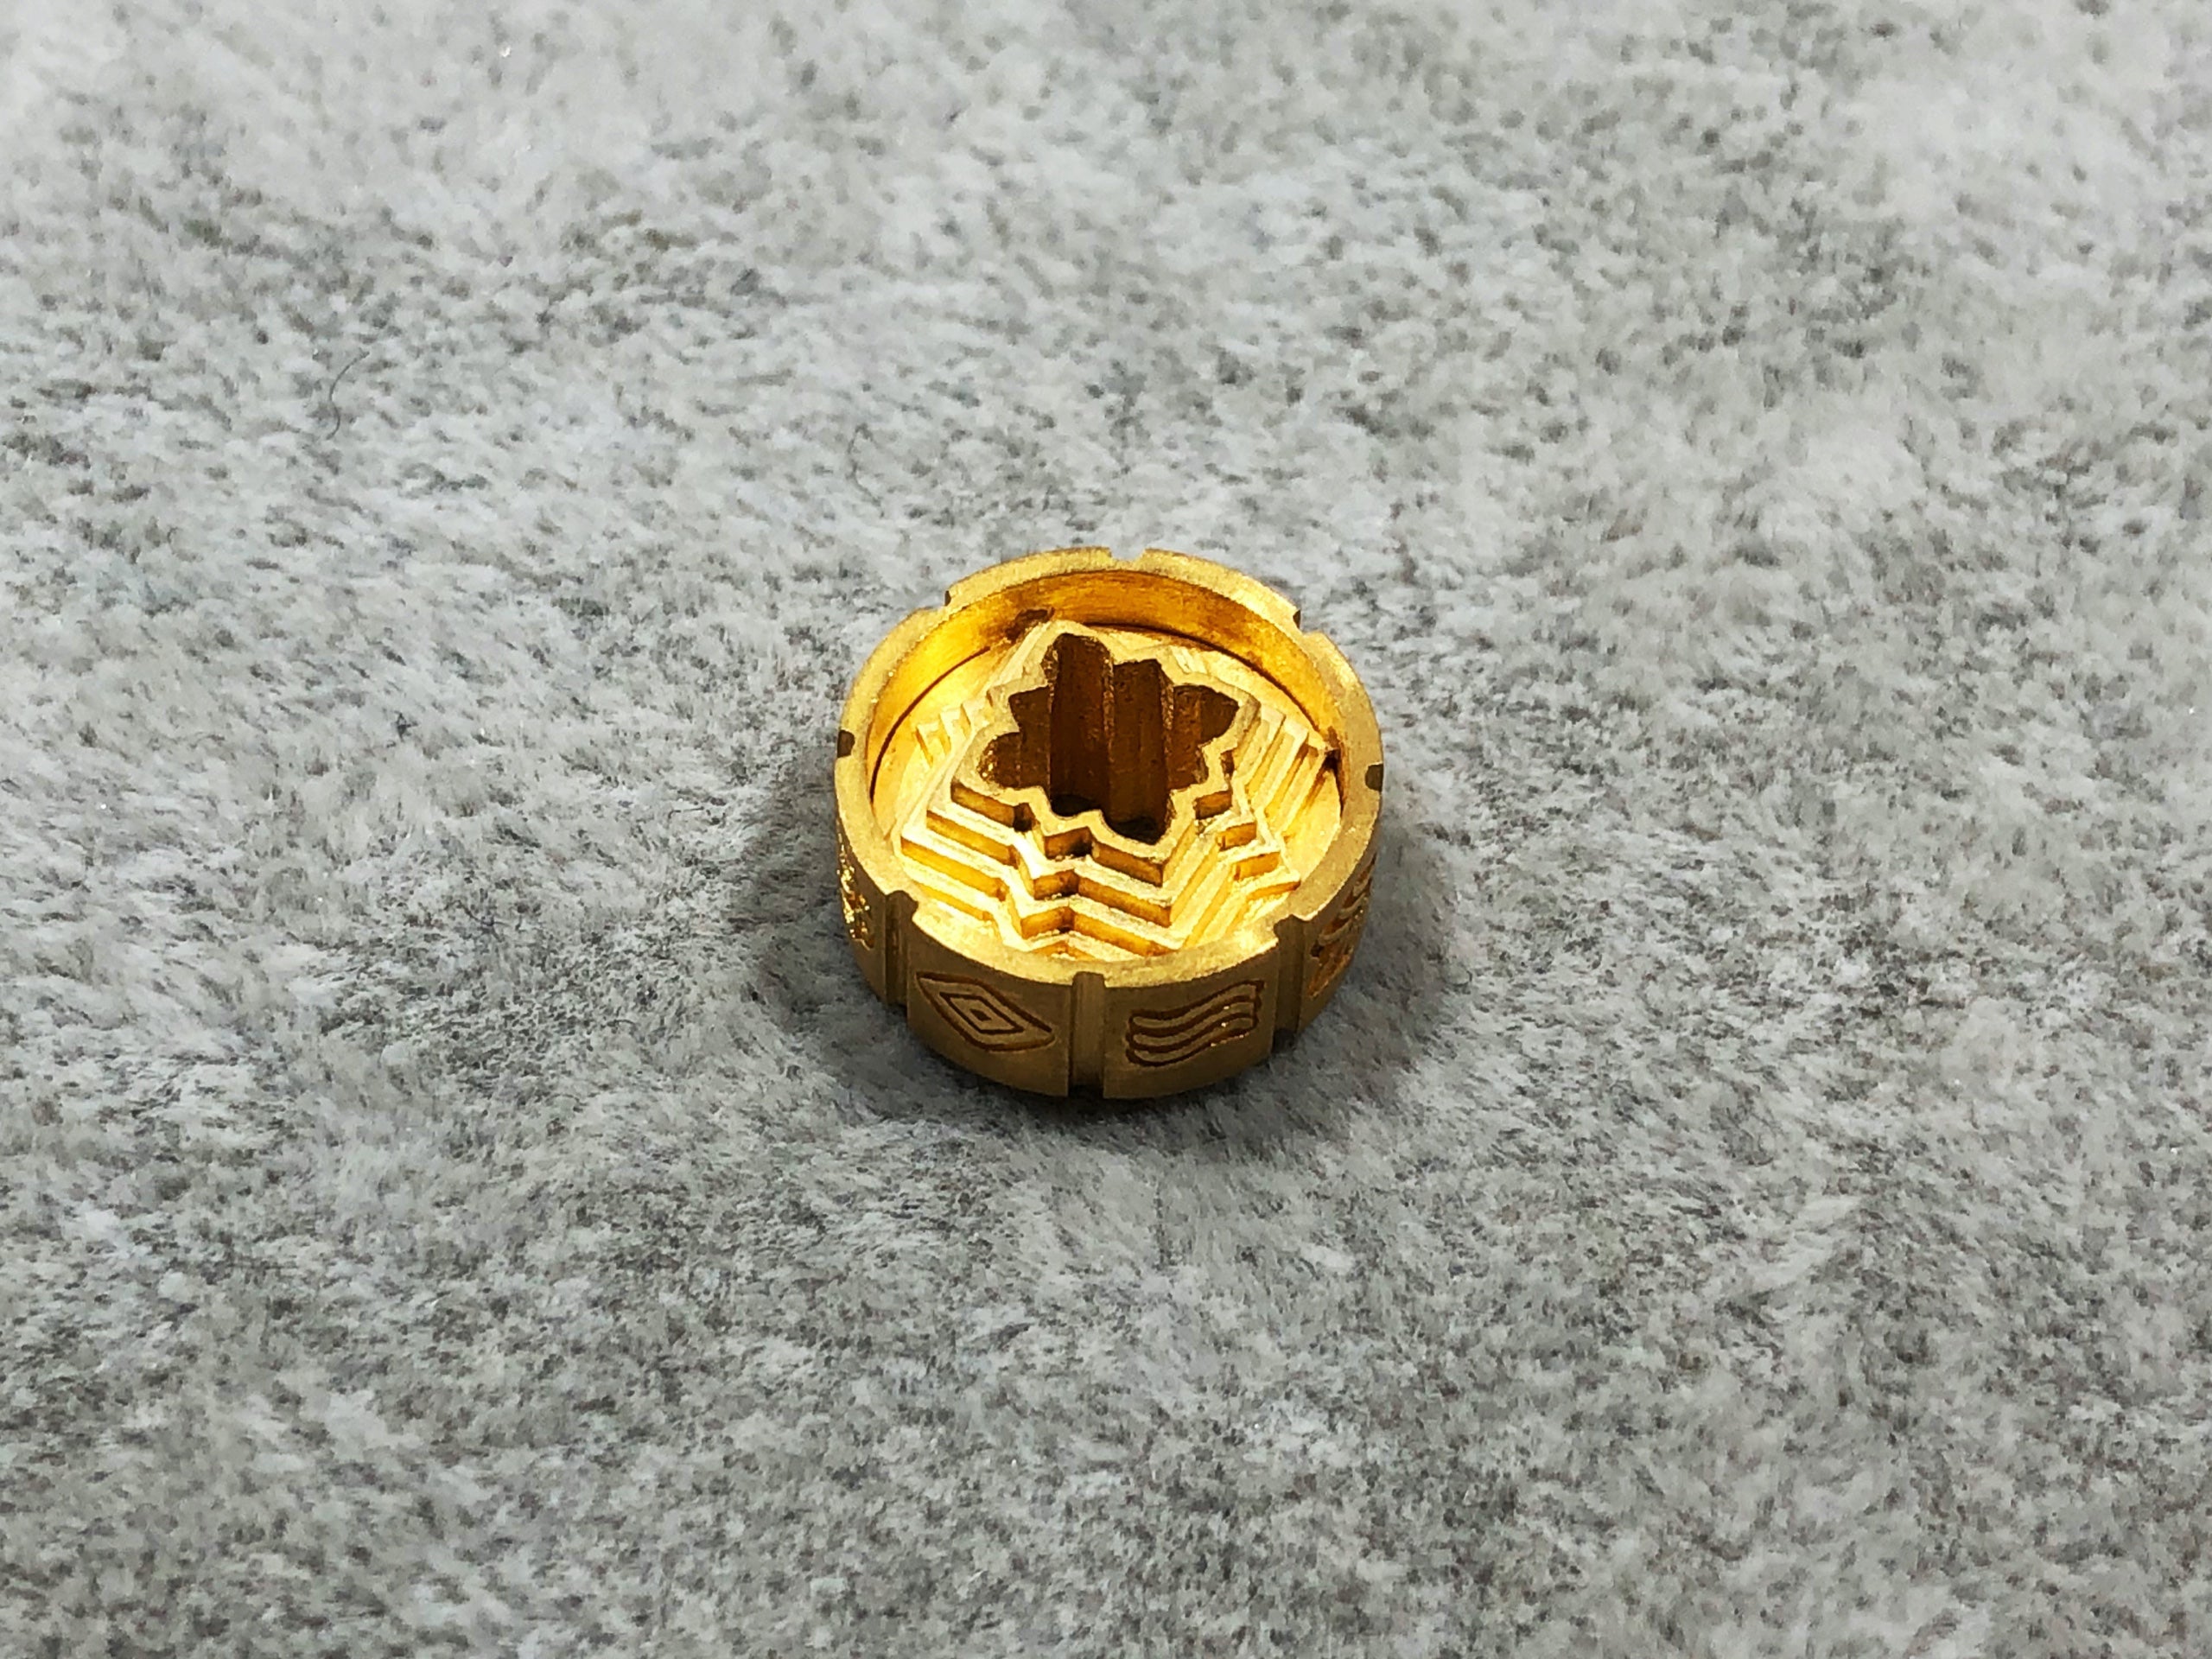 Cheers to great fortune in 2021 Lunisolar Five Phases Prayer Bead, 24K gold - 2021新年吉祥 日月五行平安珠 24K金款